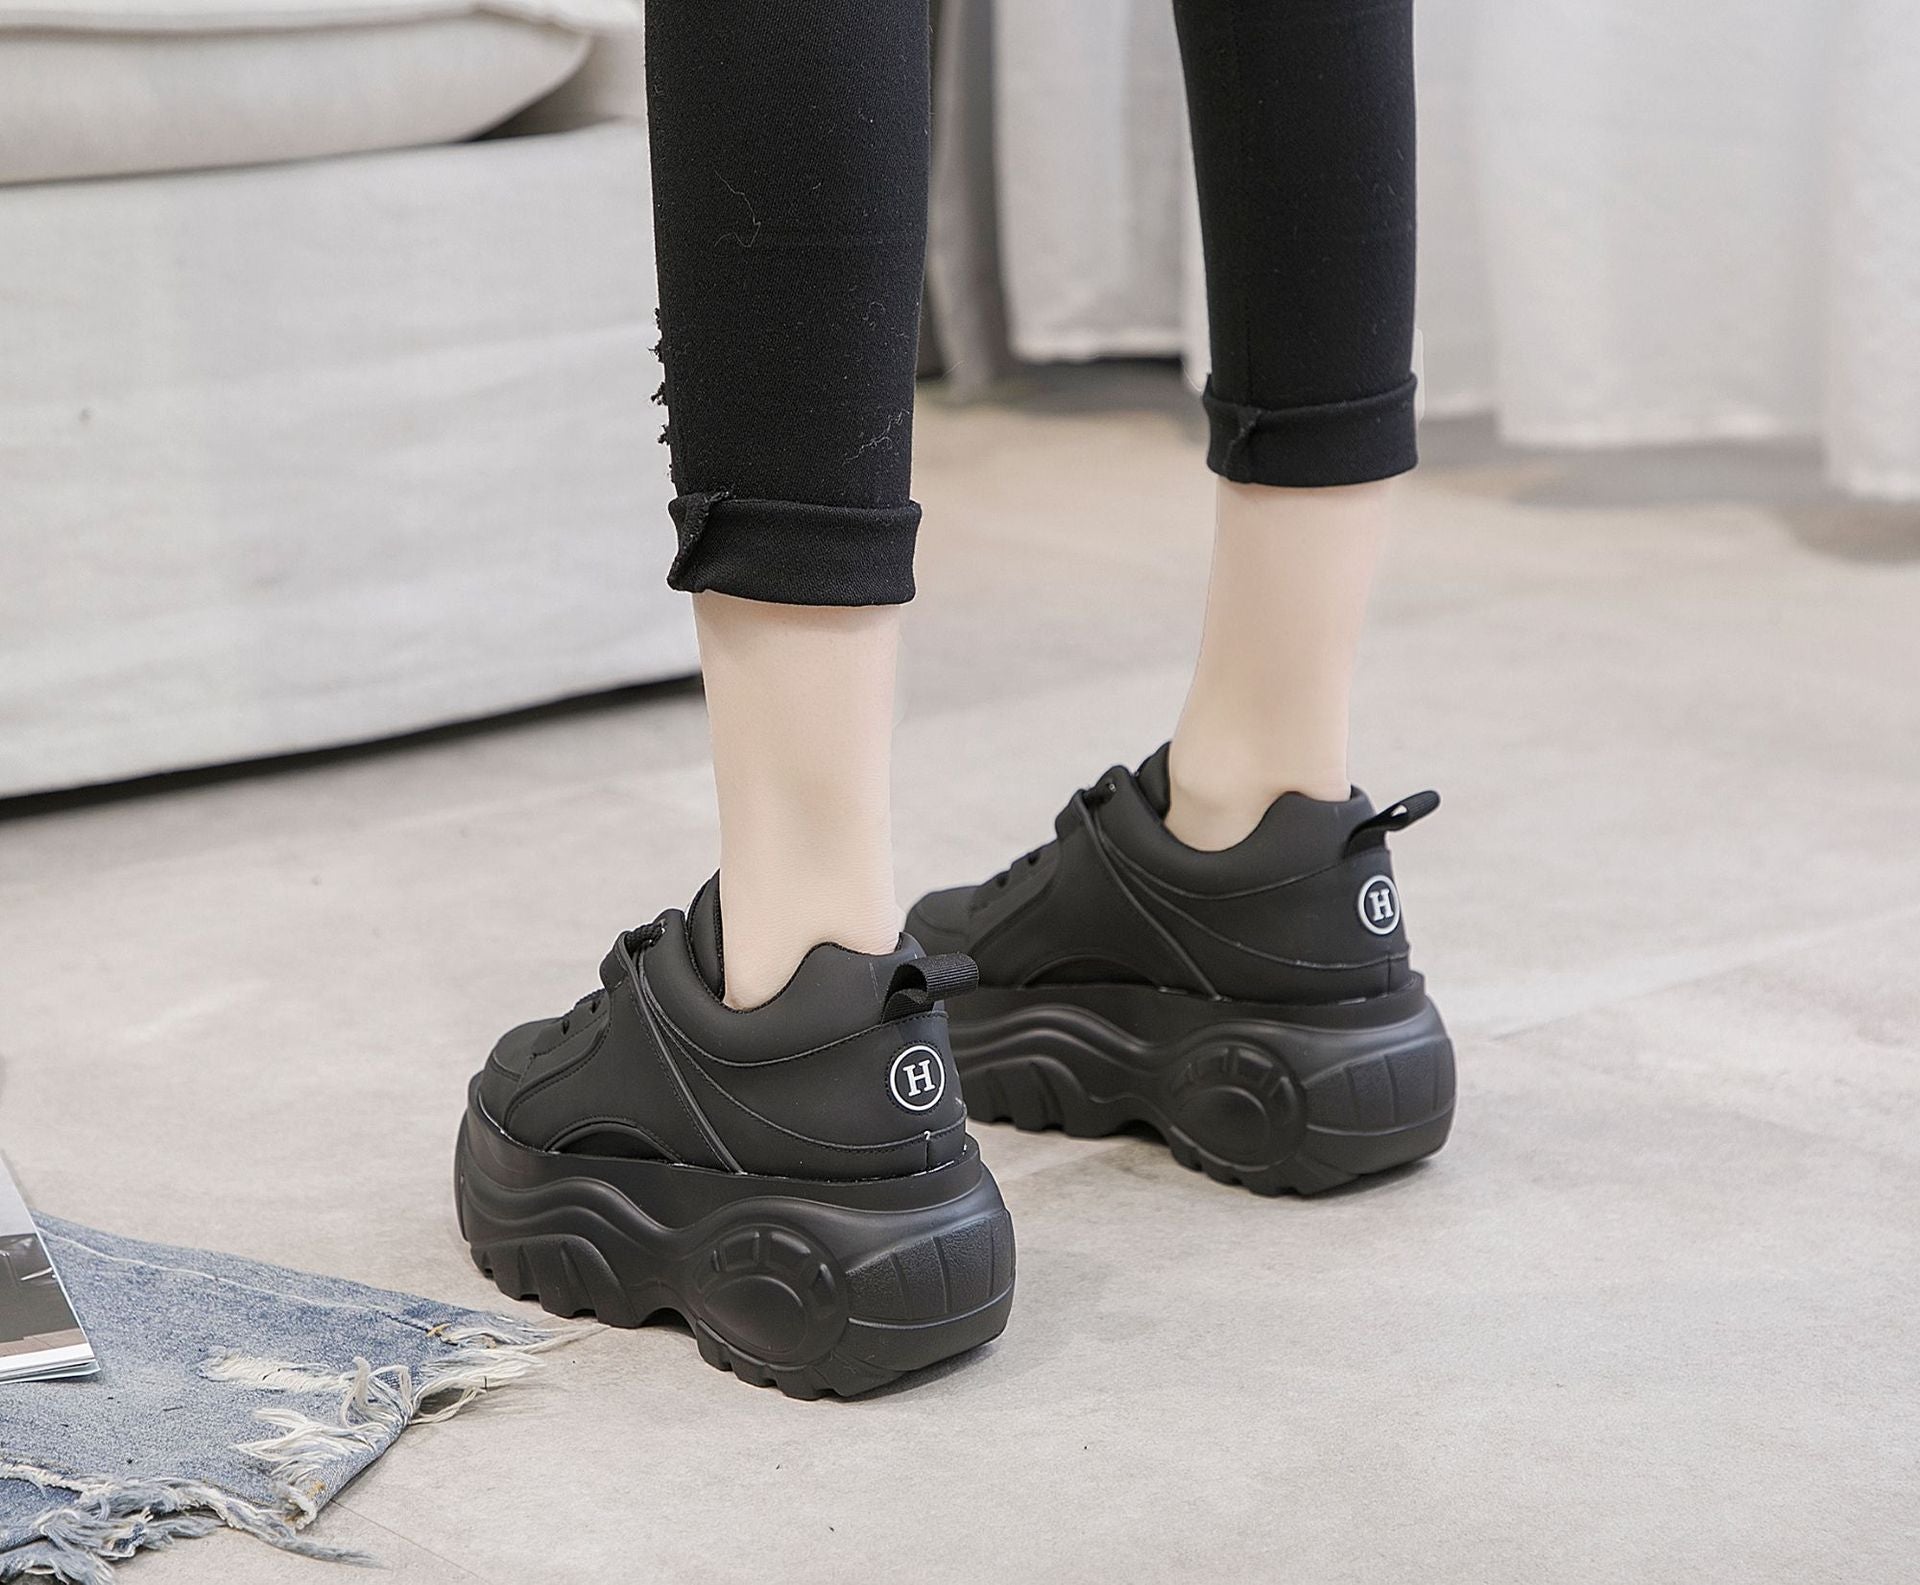 really high platform sneakers